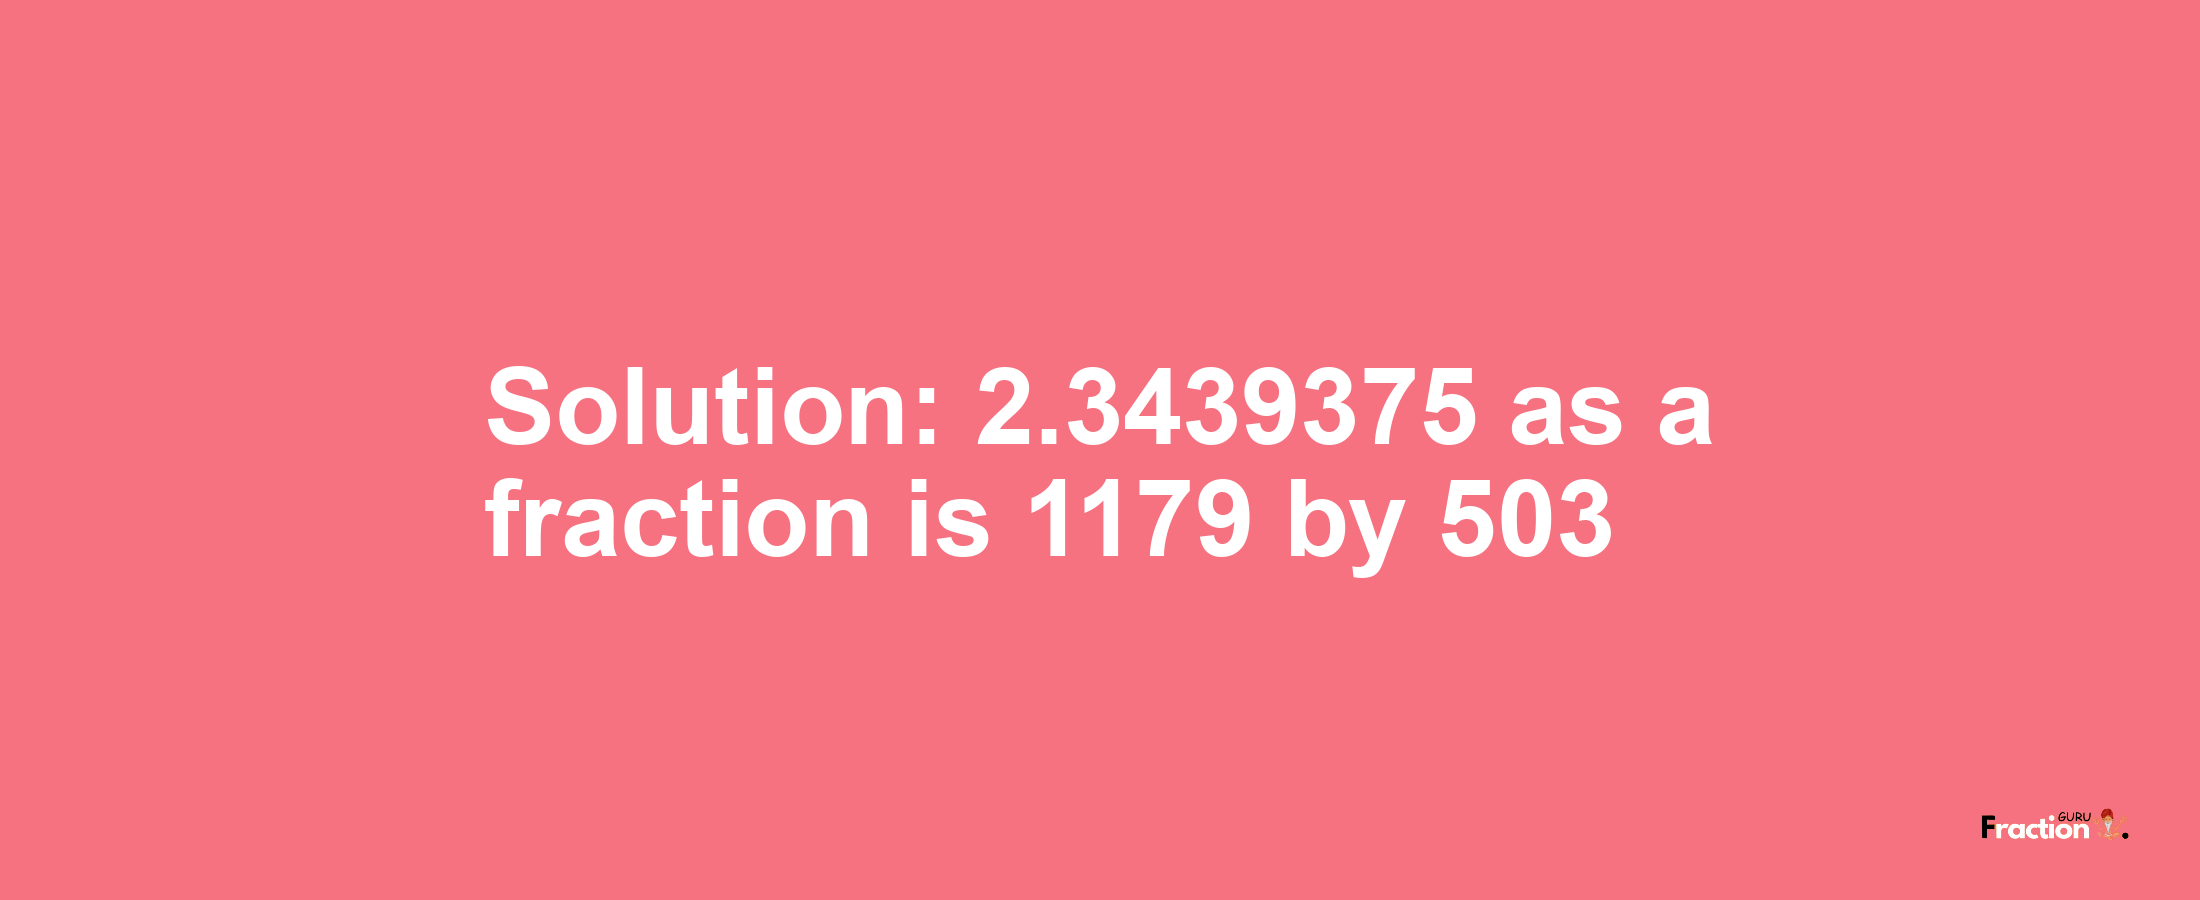 Solution:2.3439375 as a fraction is 1179/503